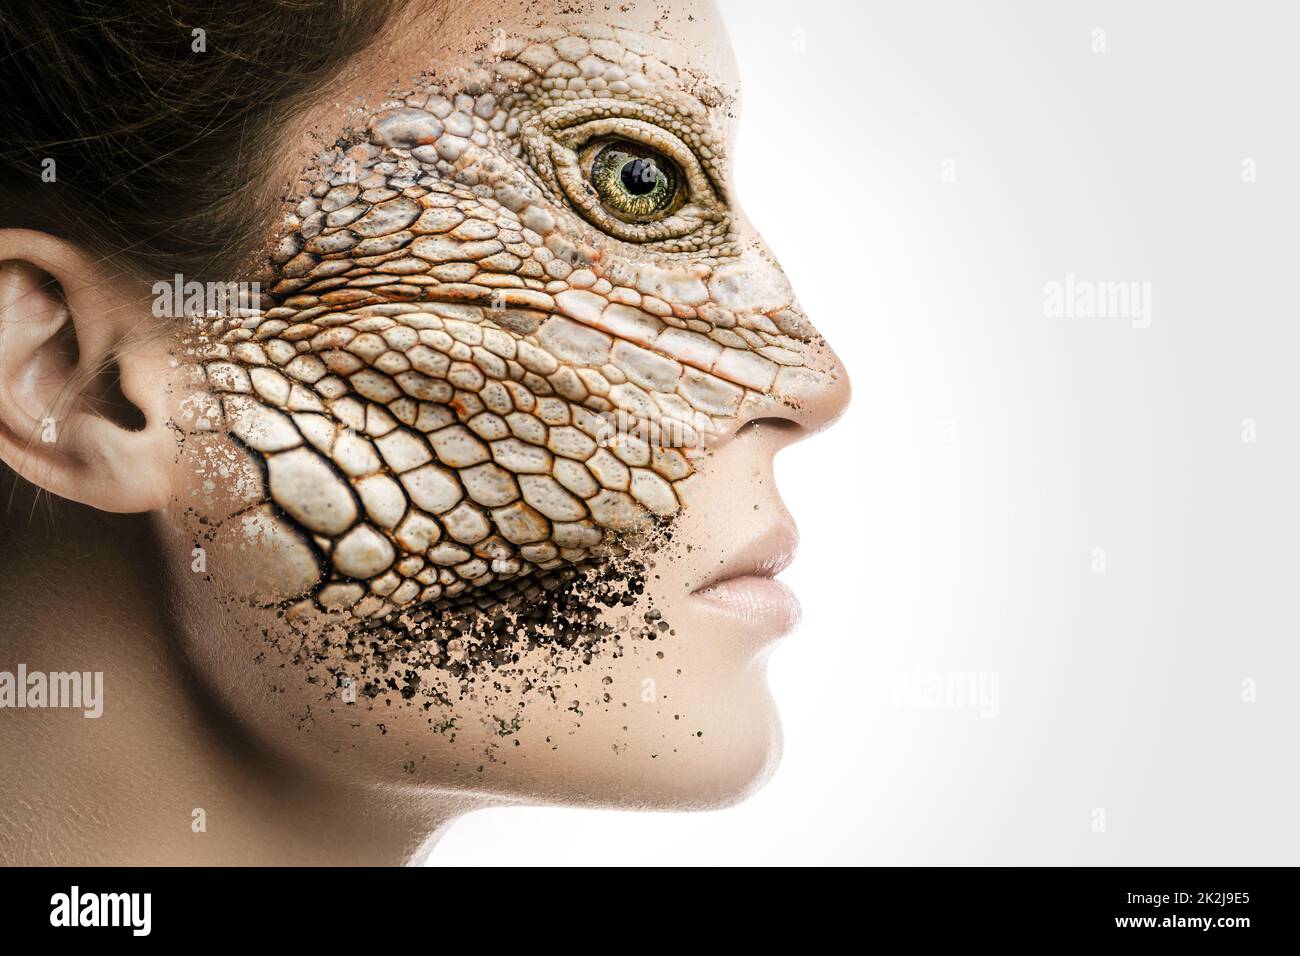 Reptiloid as science fiction character or reptilian conspiracy theory concept. Stock Photo